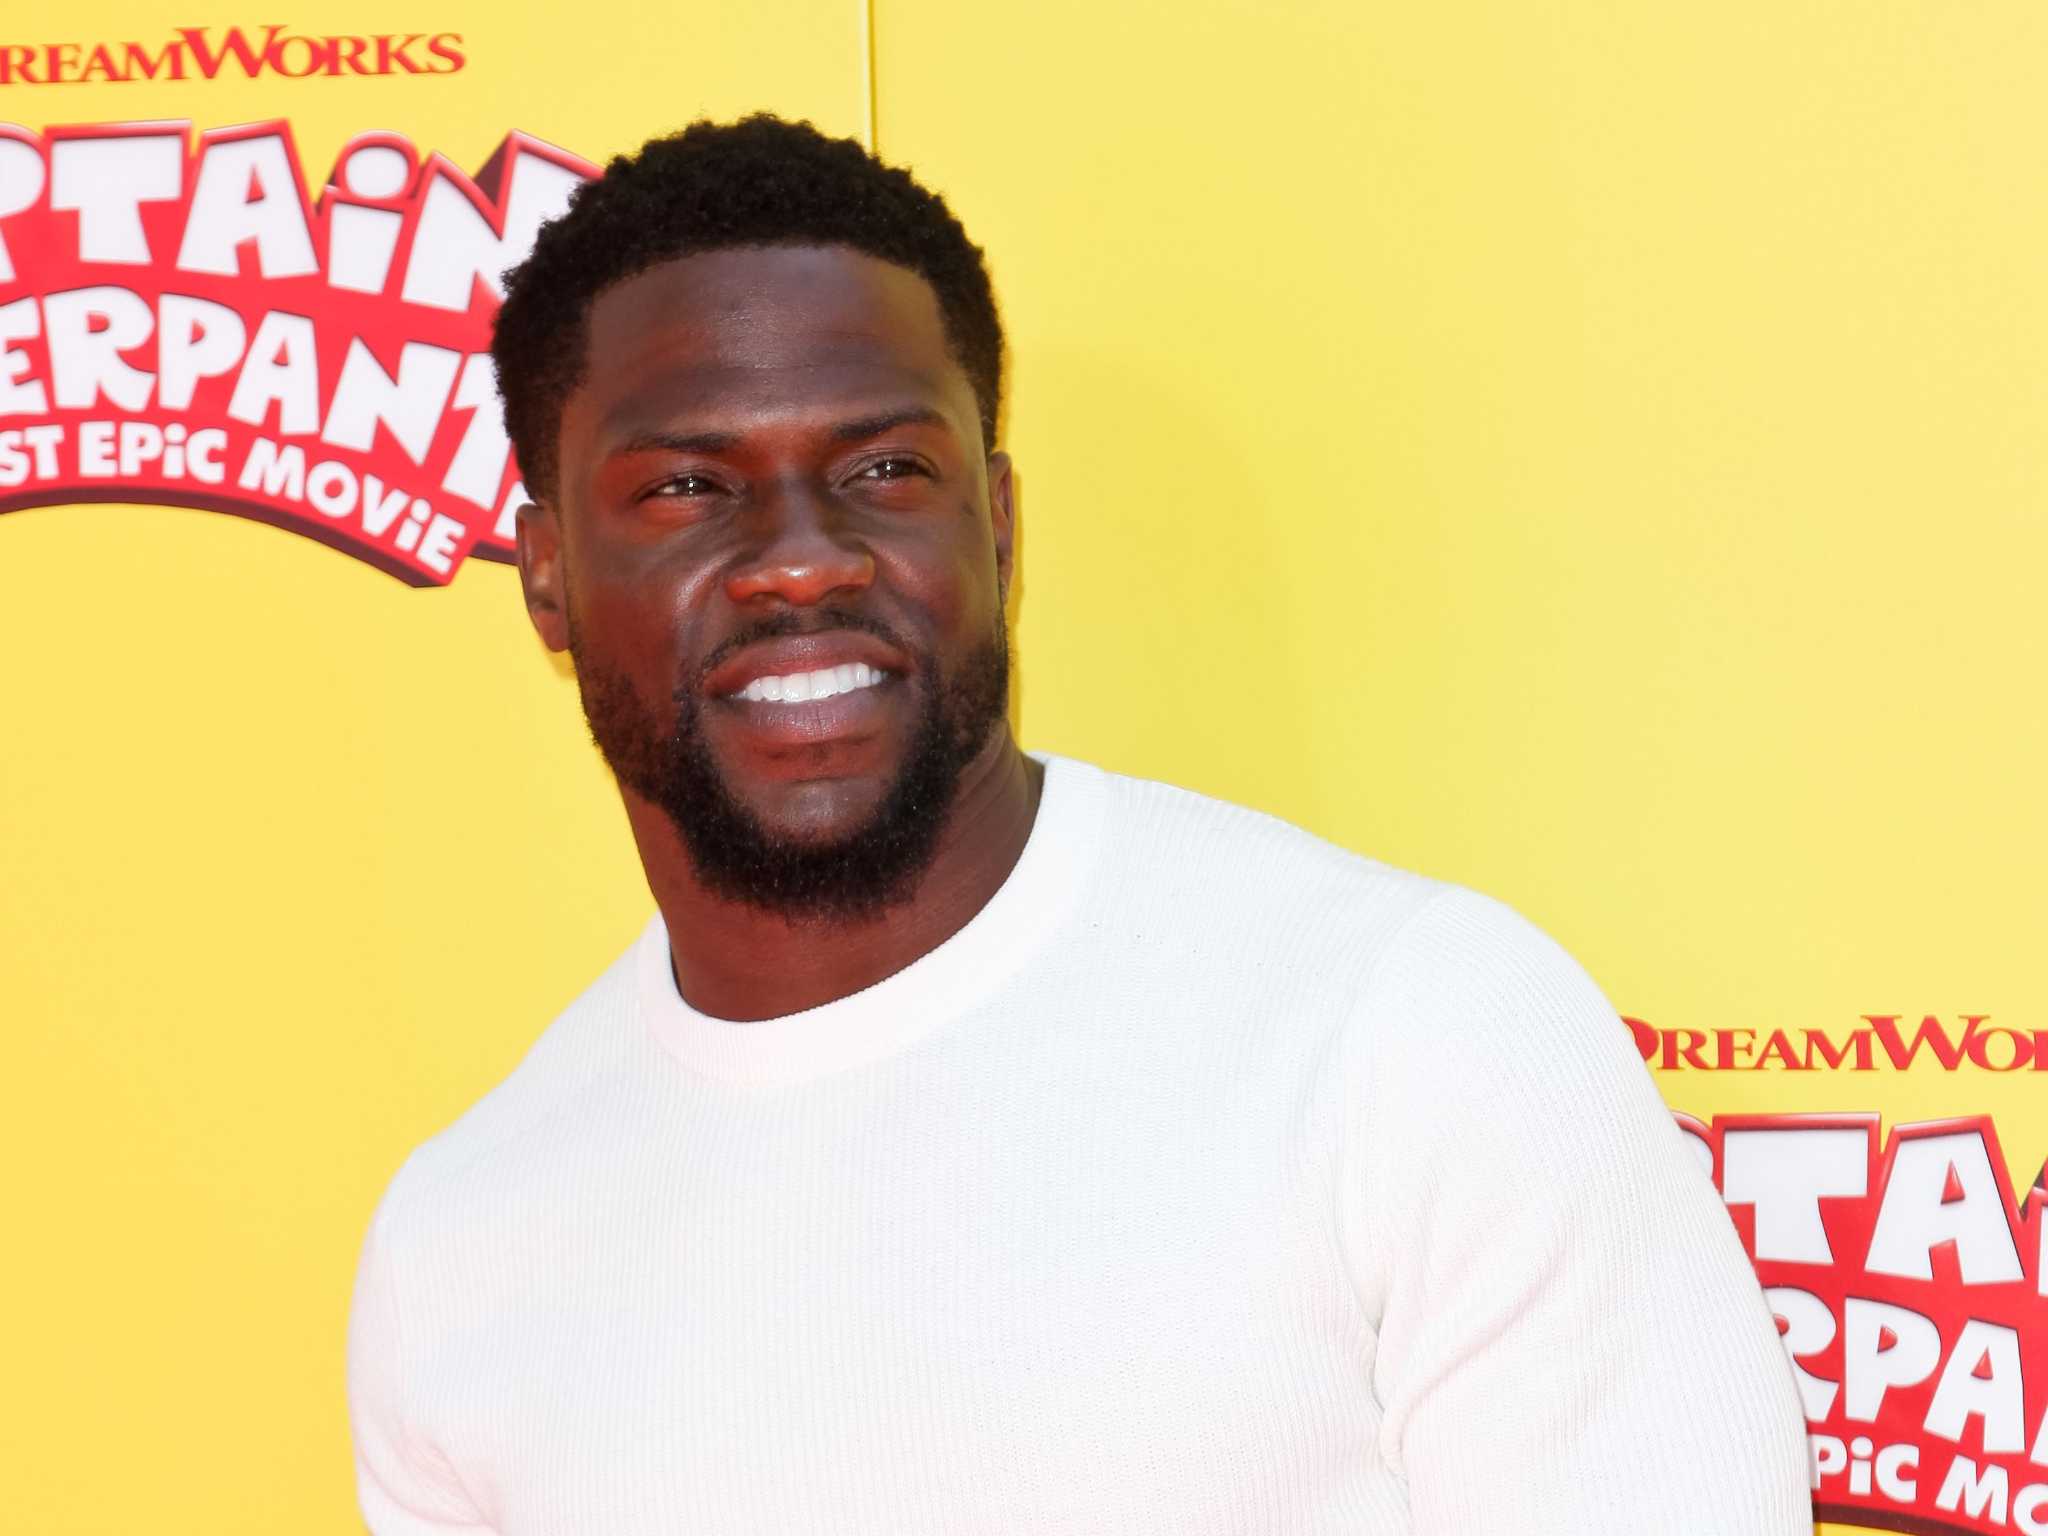 Kevin Hart challenges celebrities to donate to help Houston